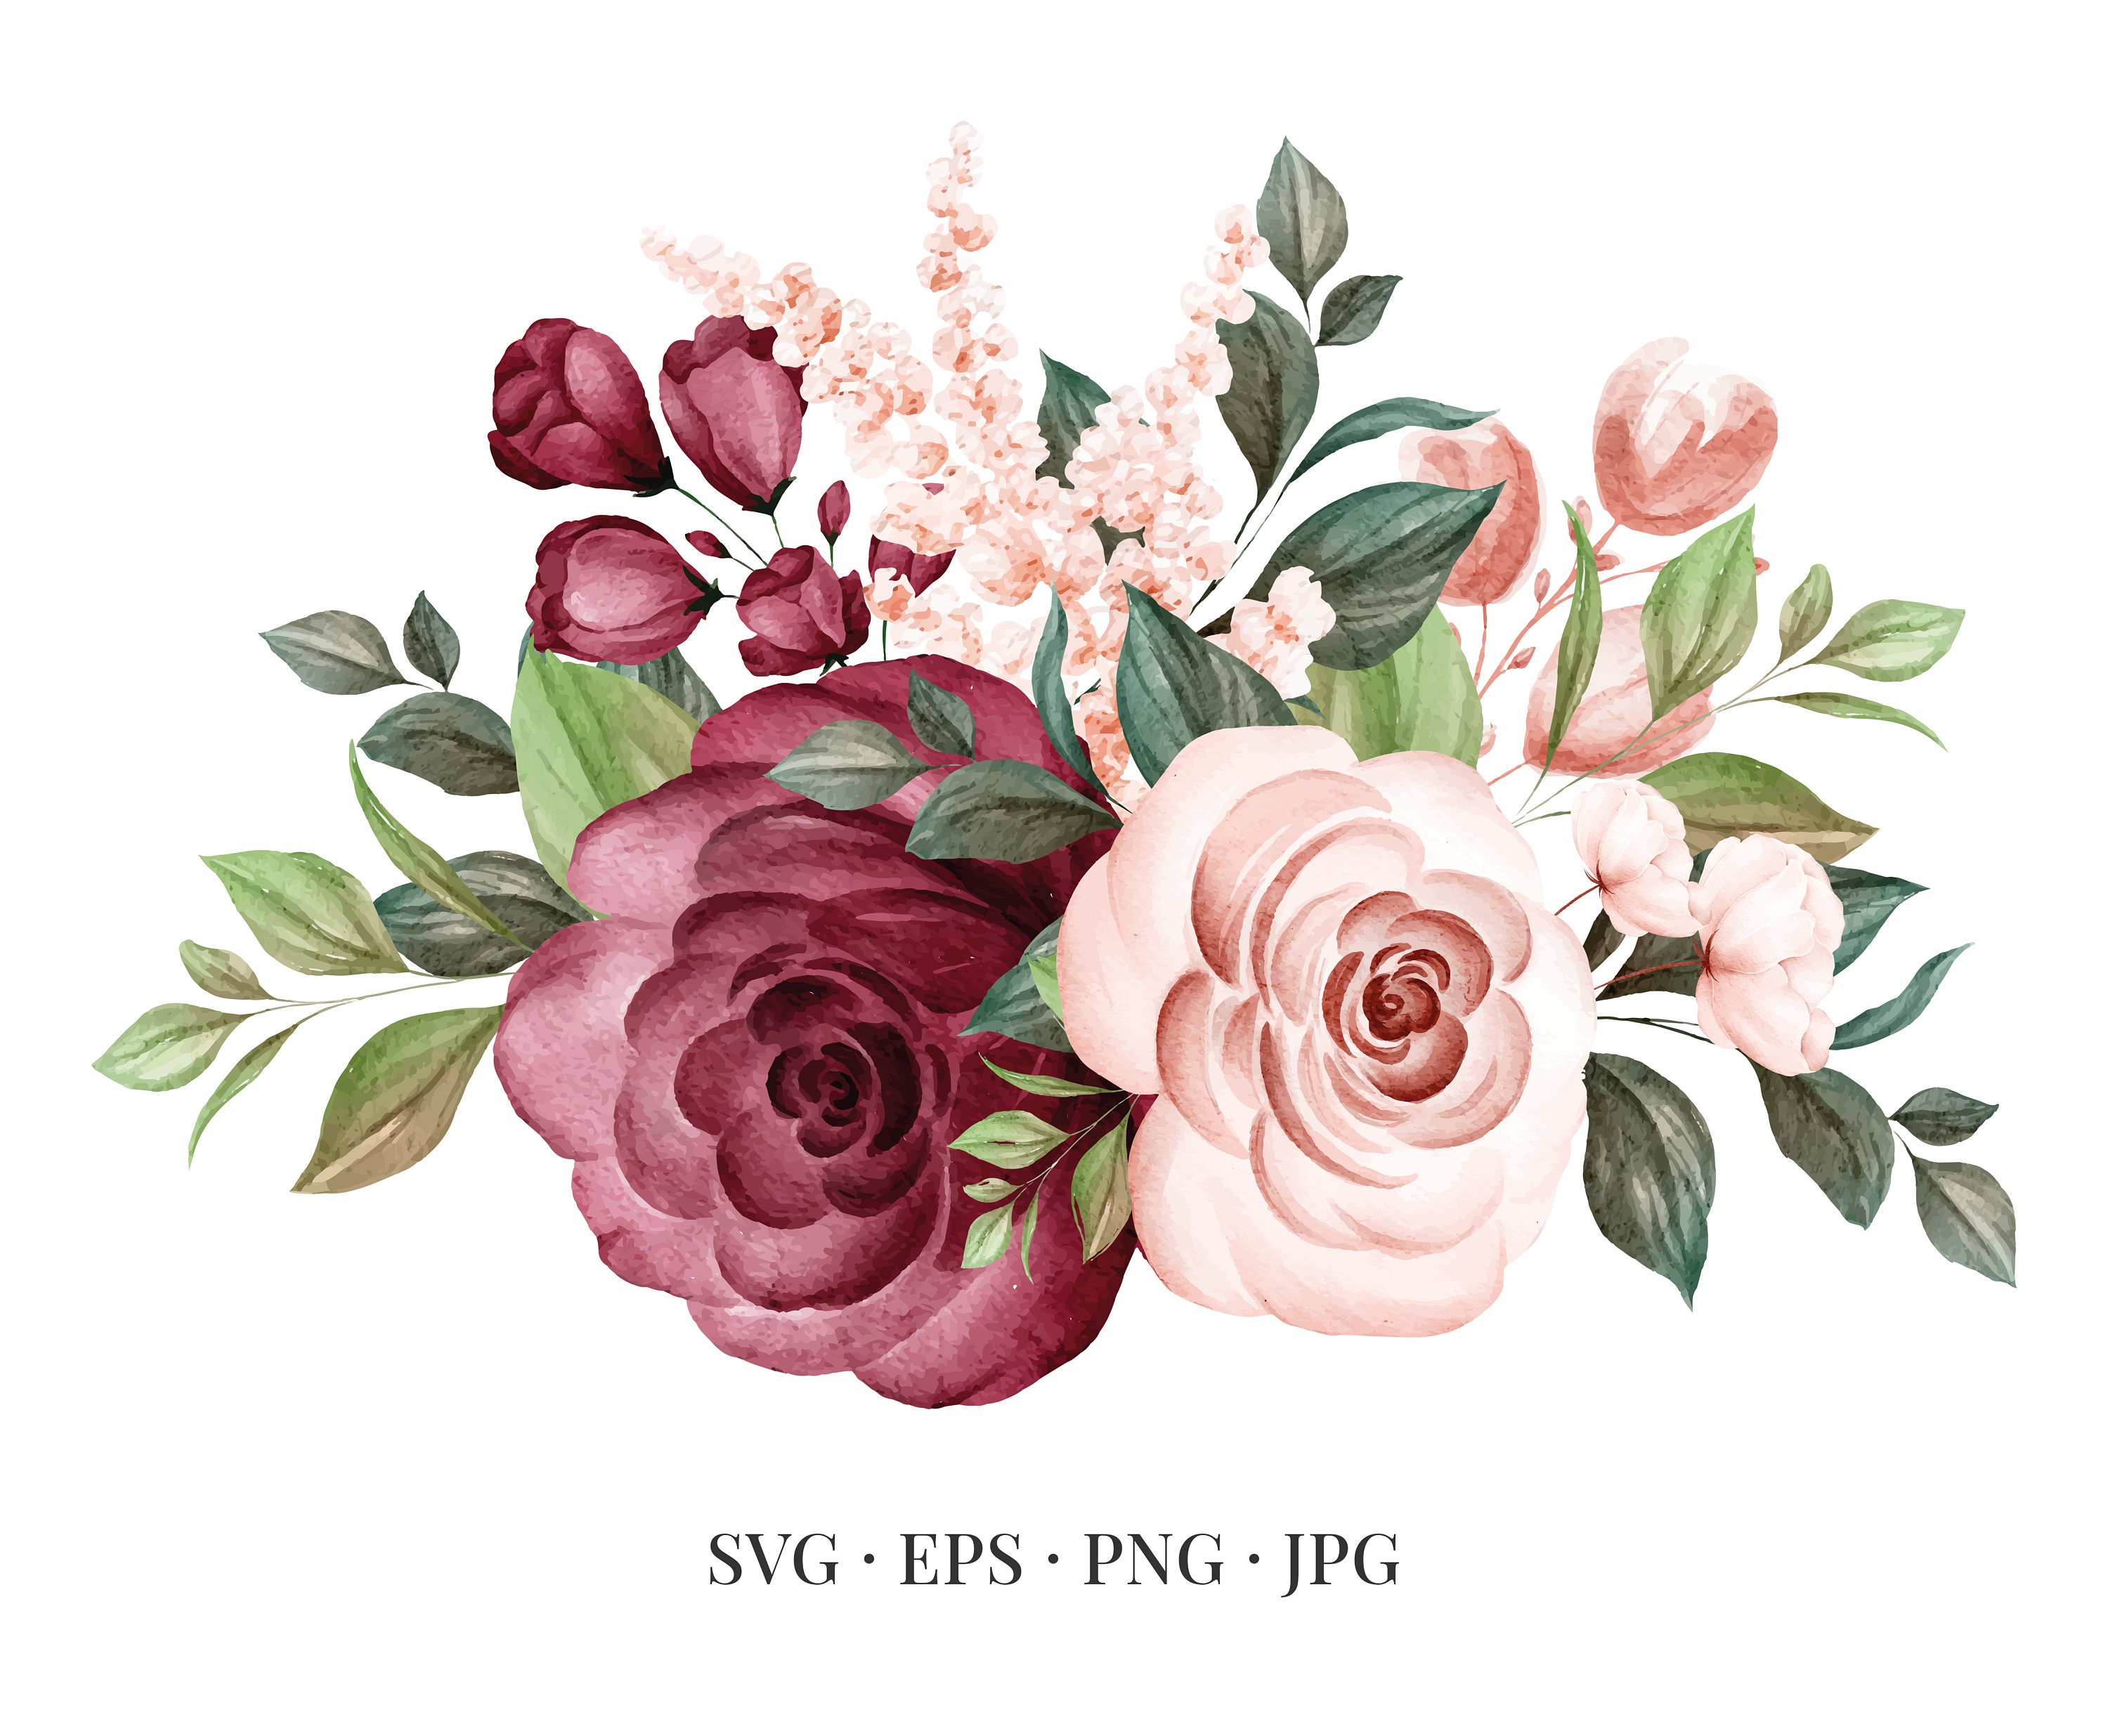 Bouquet of Roses - Floral Flower Flowers Floristic Watercolor - Svg Eps Png  Jpg - Image Clipart Vector Design Crafting Printable Download